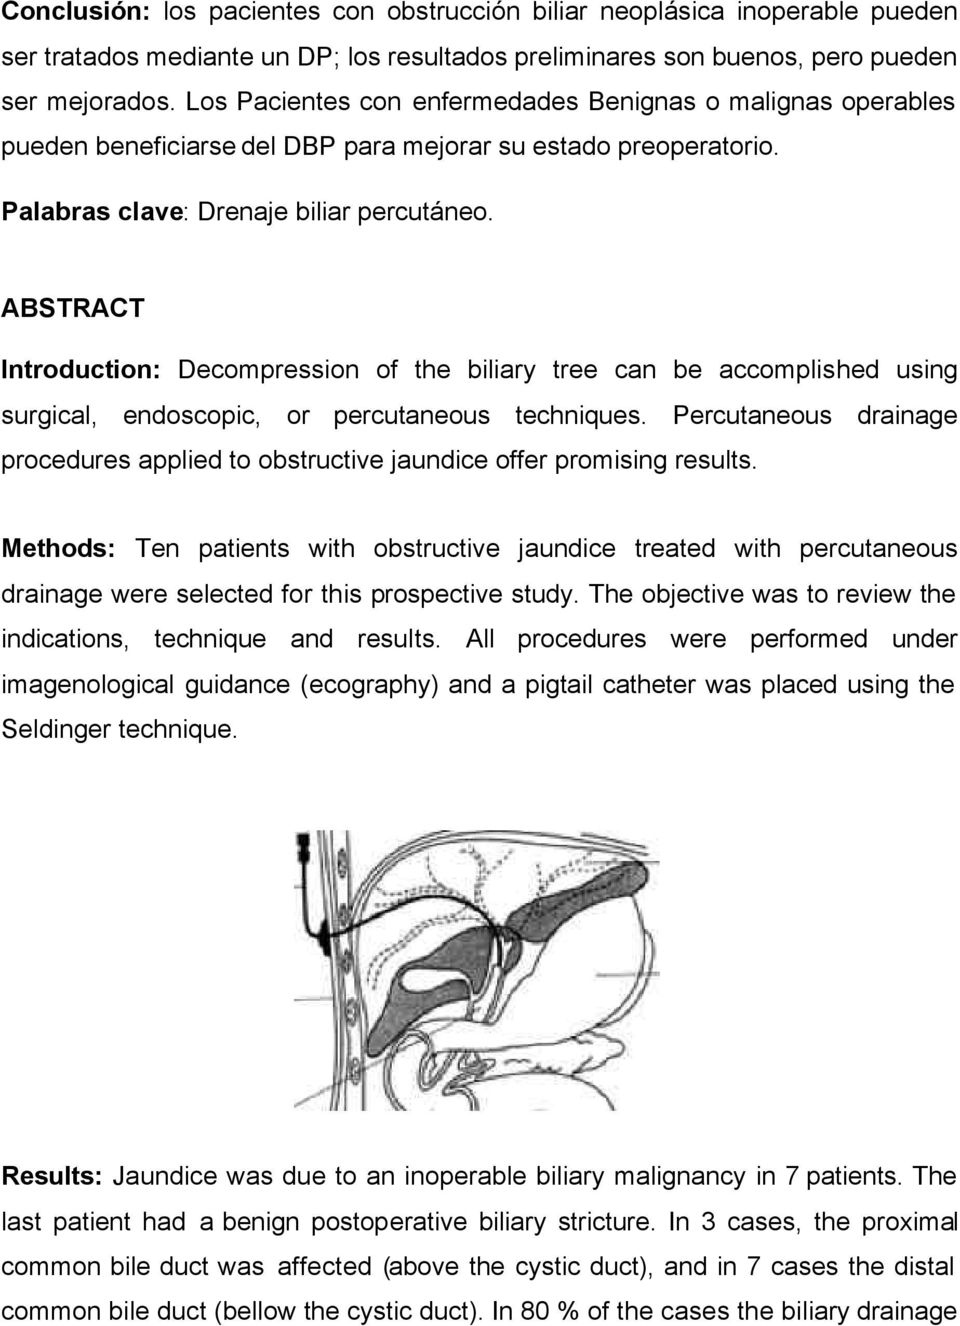 ABSTRACT Introduction: Decompression of the biliary tree can be accomplished using surgical, endoscopic, or percutaneous techniques.